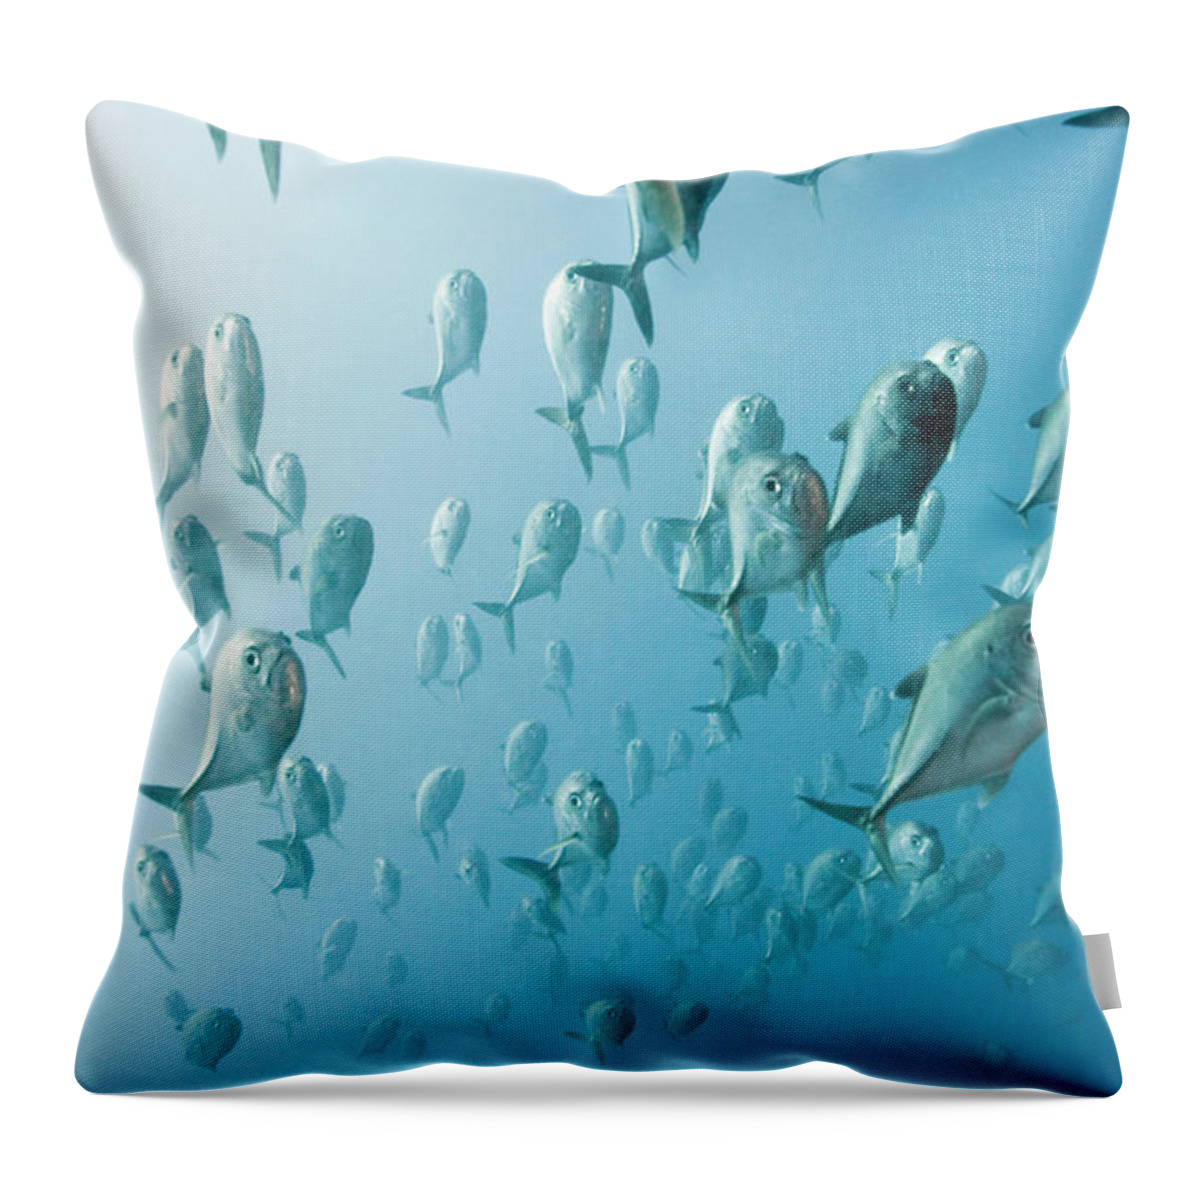 Underwater Throw Pillow featuring the photograph Schooling Jacks Carangoides Plagiotaenia by Michele Westmorland